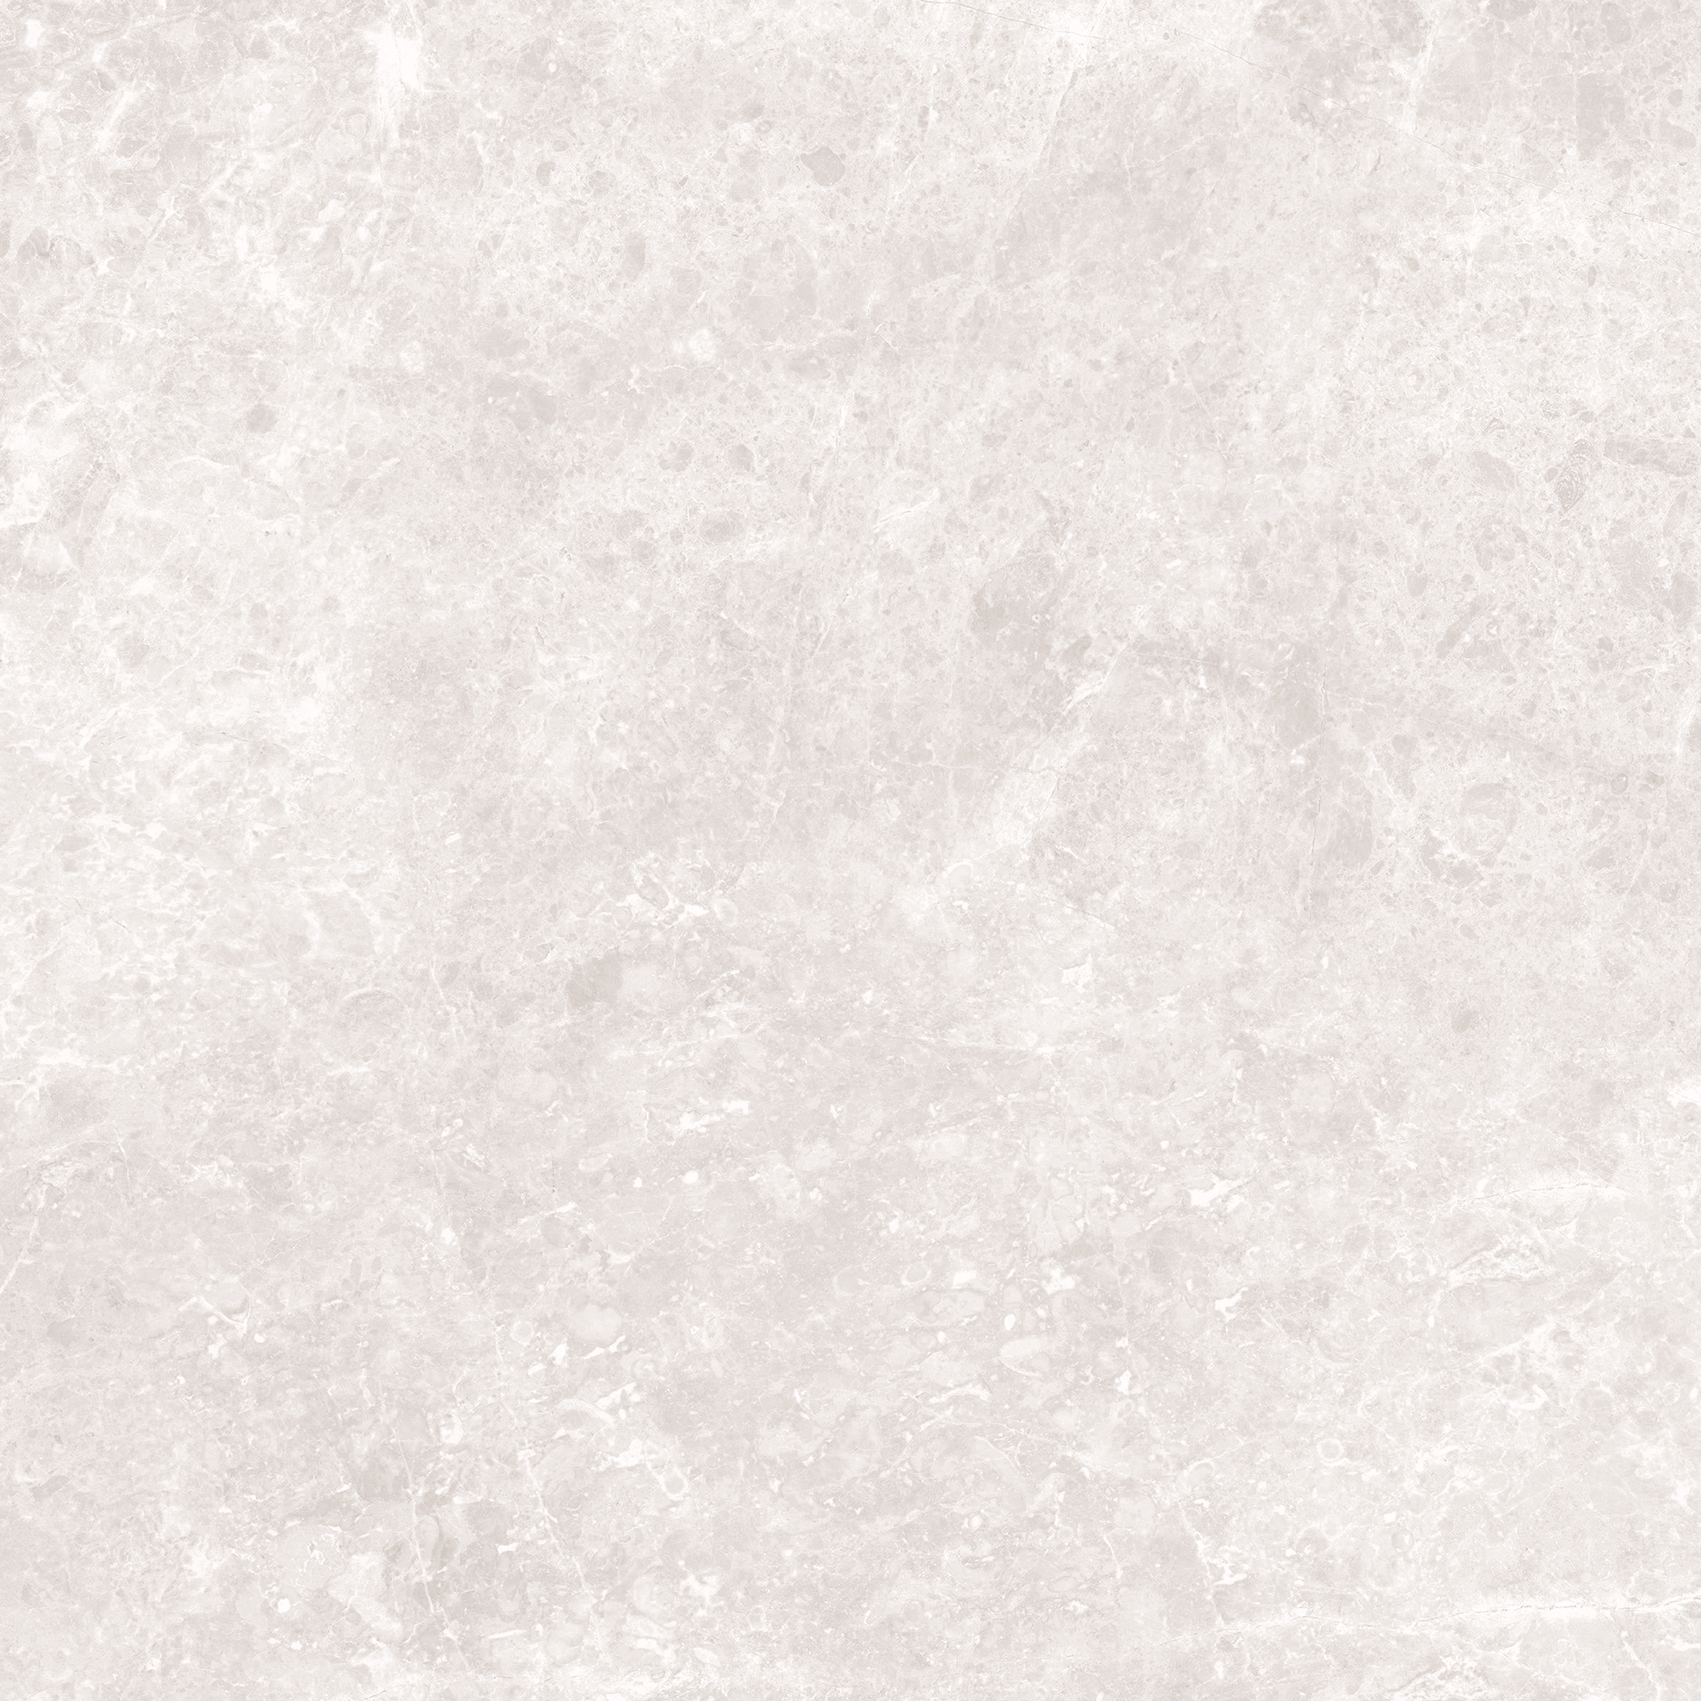 Lovetiles Marble Light Grey Polished B6150051047K polished 60x60cm rectified 9mm